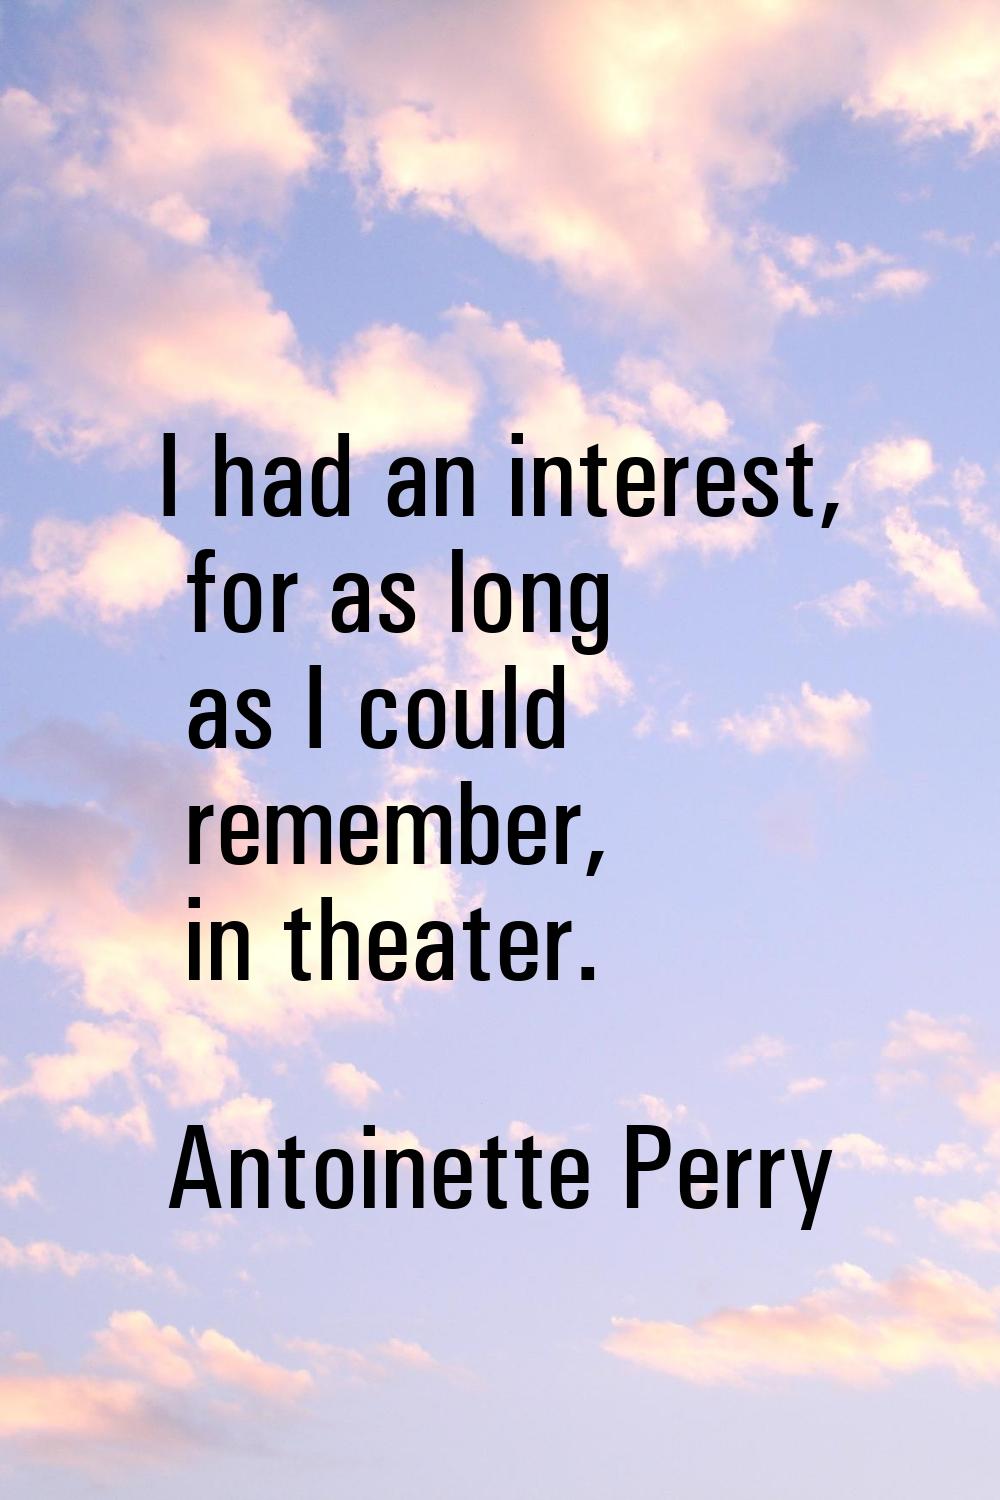 I had an interest, for as long as I could remember, in theater.